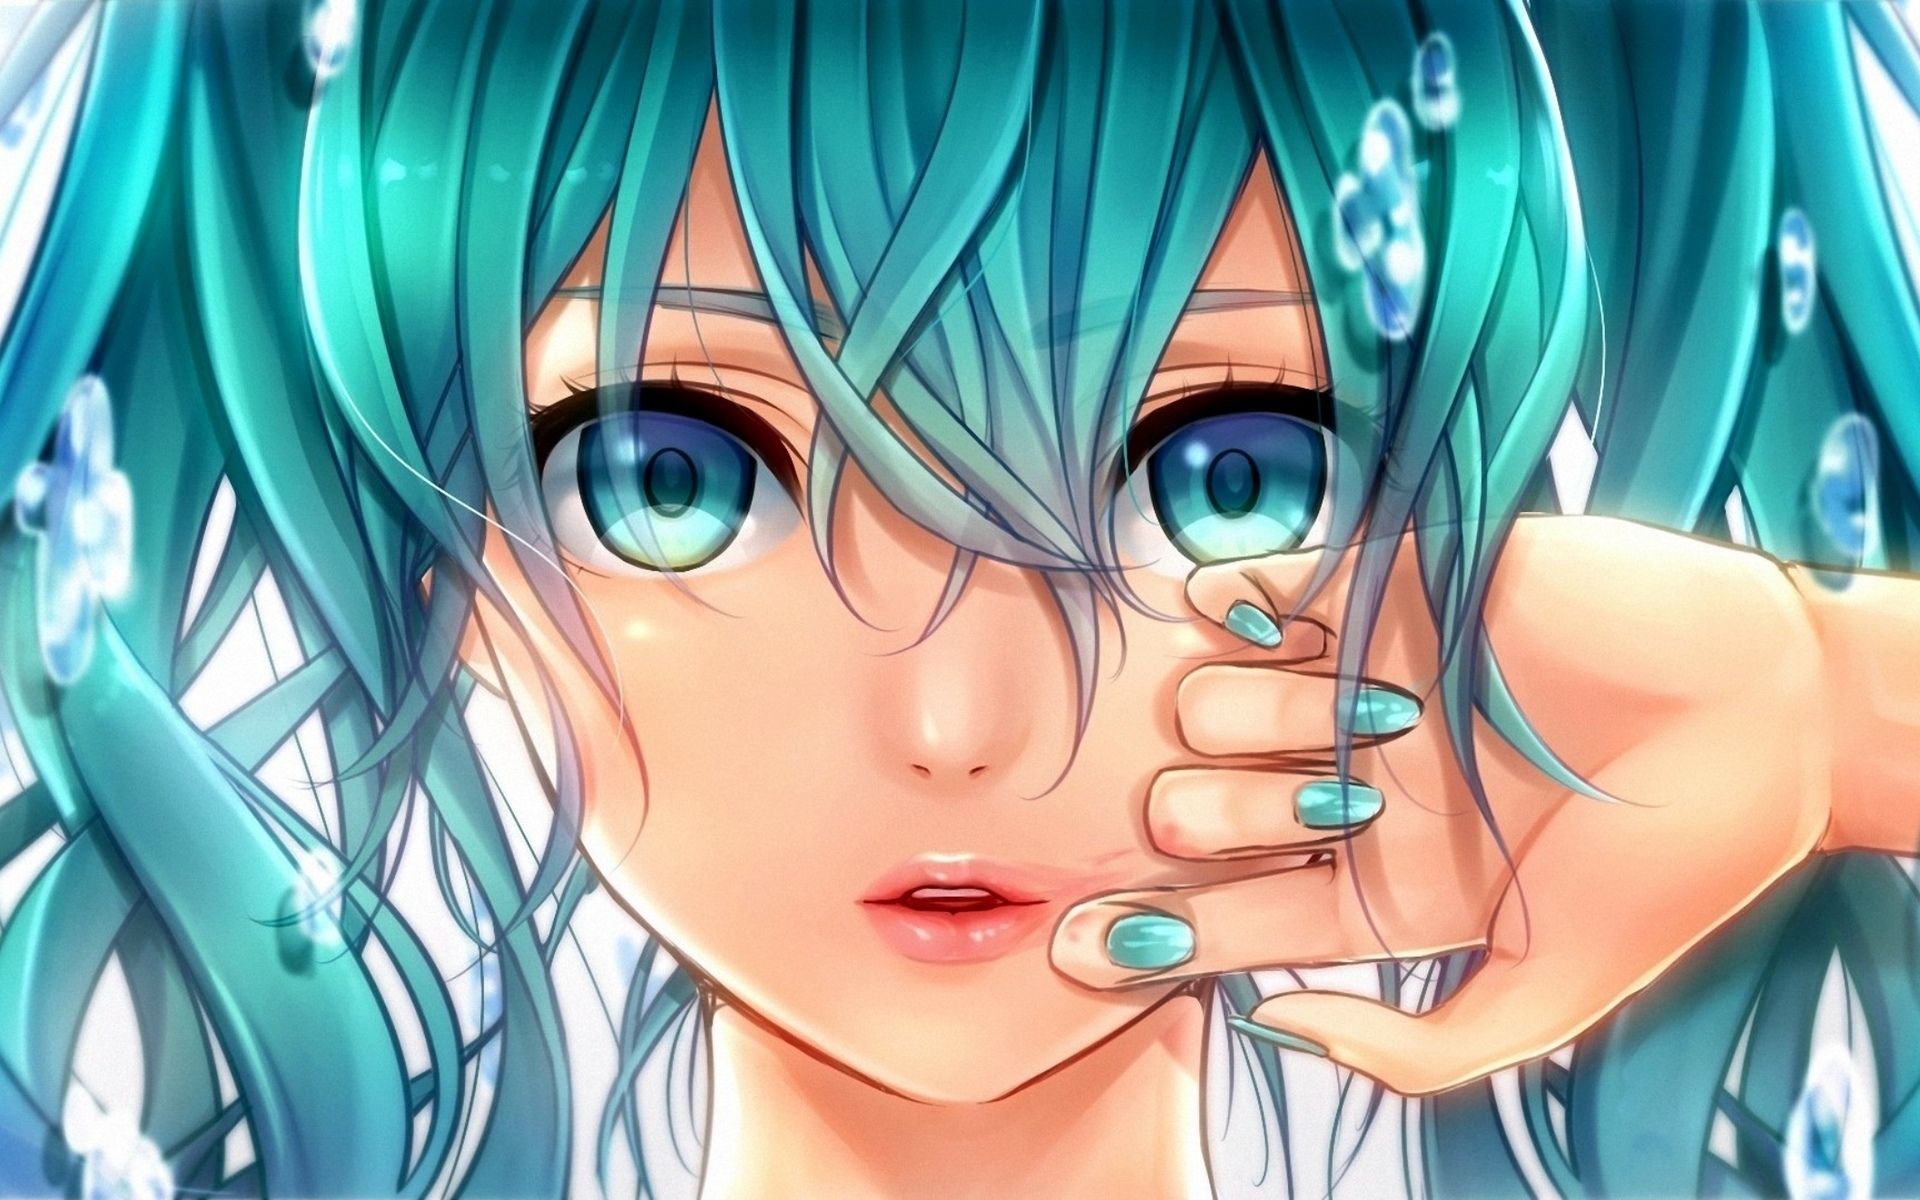 1. Anime girl with blue hair - Pinterest - wide 11